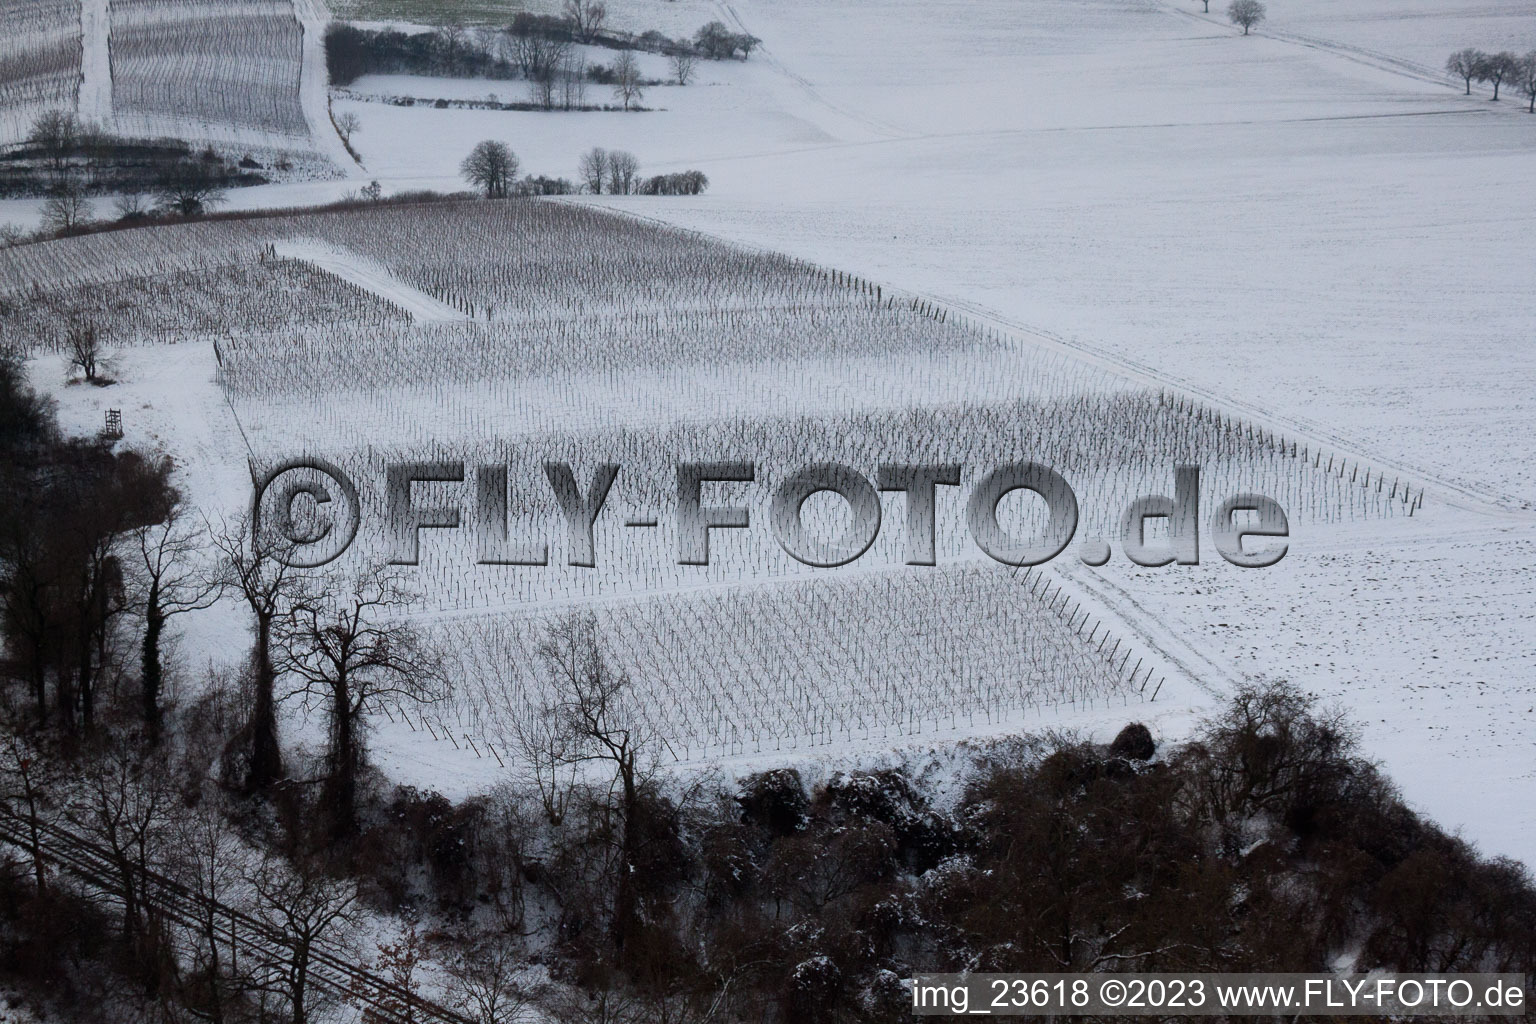 Aerial view of Winter Wingert in Freckenfeld in the state Rhineland-Palatinate, Germany